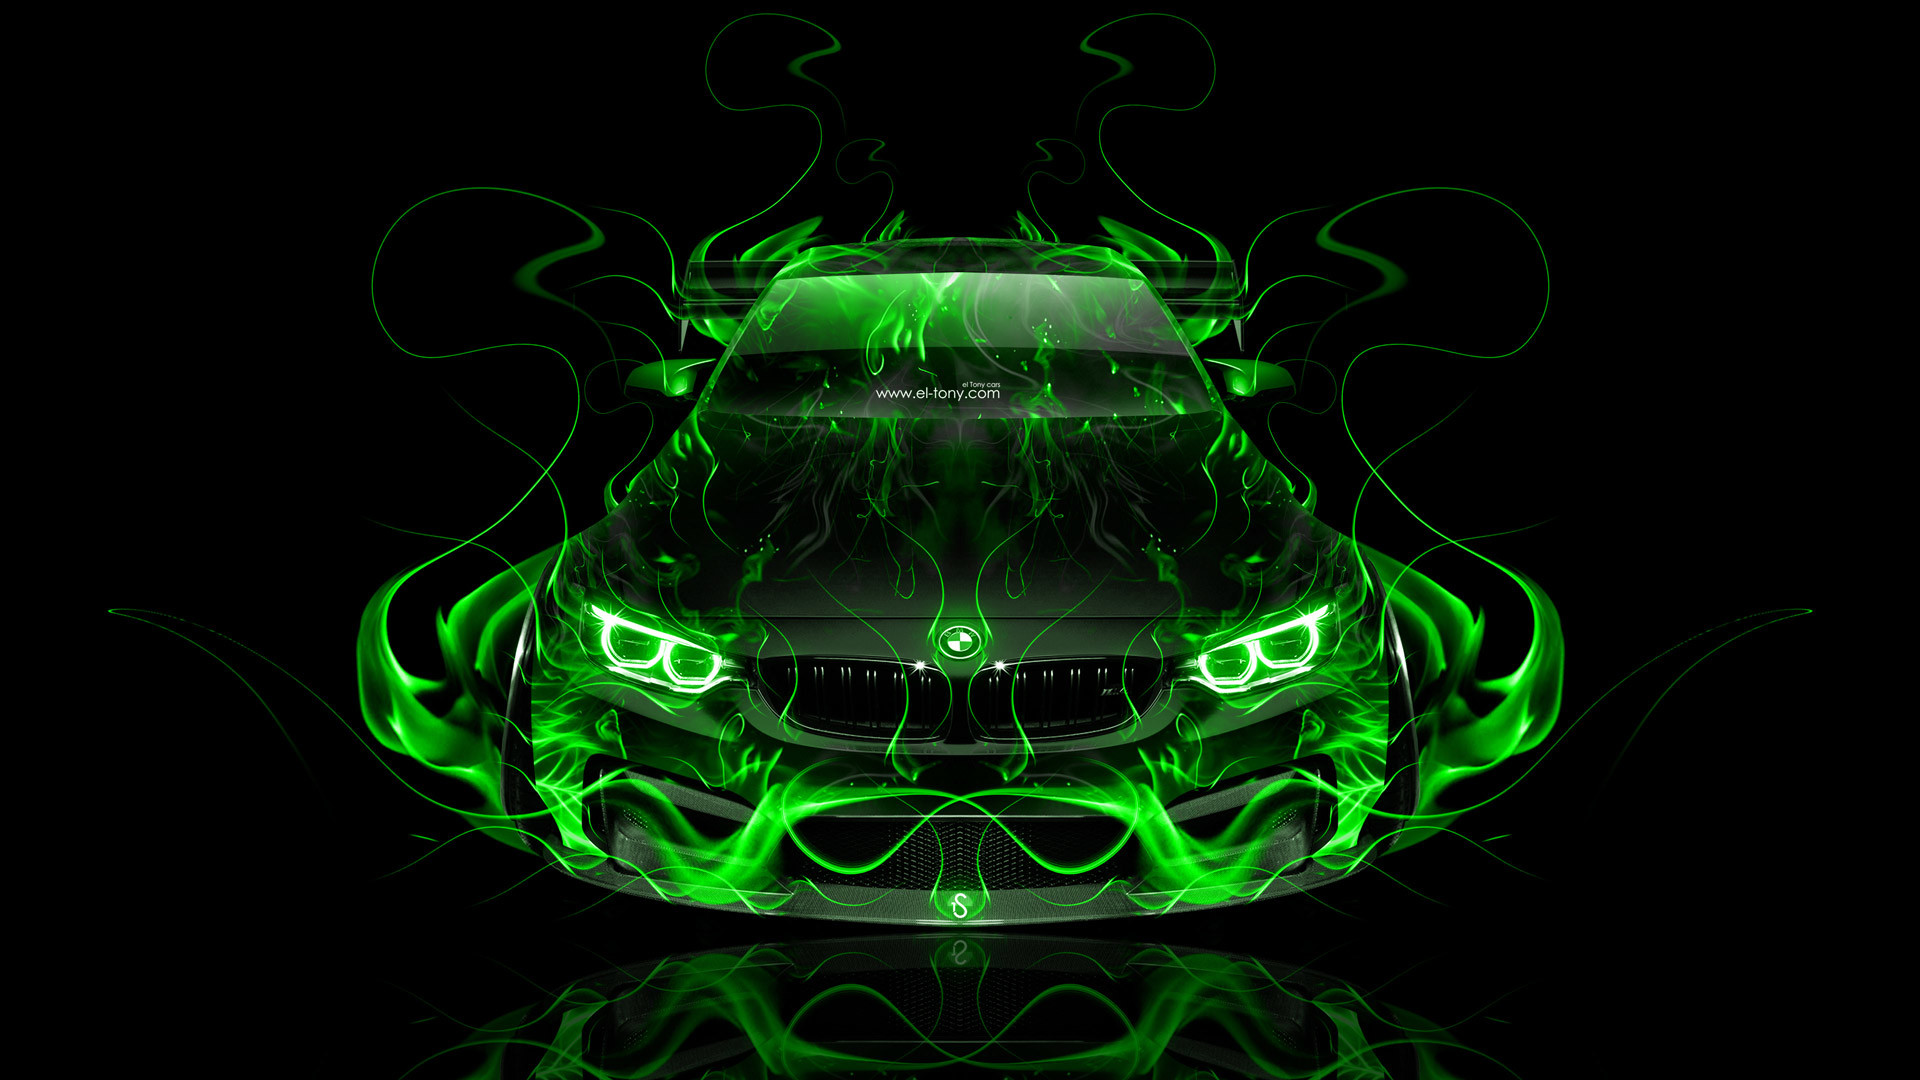 1920x1080 ... BMW-M4-Tuning-FrontUp-Super-Fire-Flame-Abstract- ...